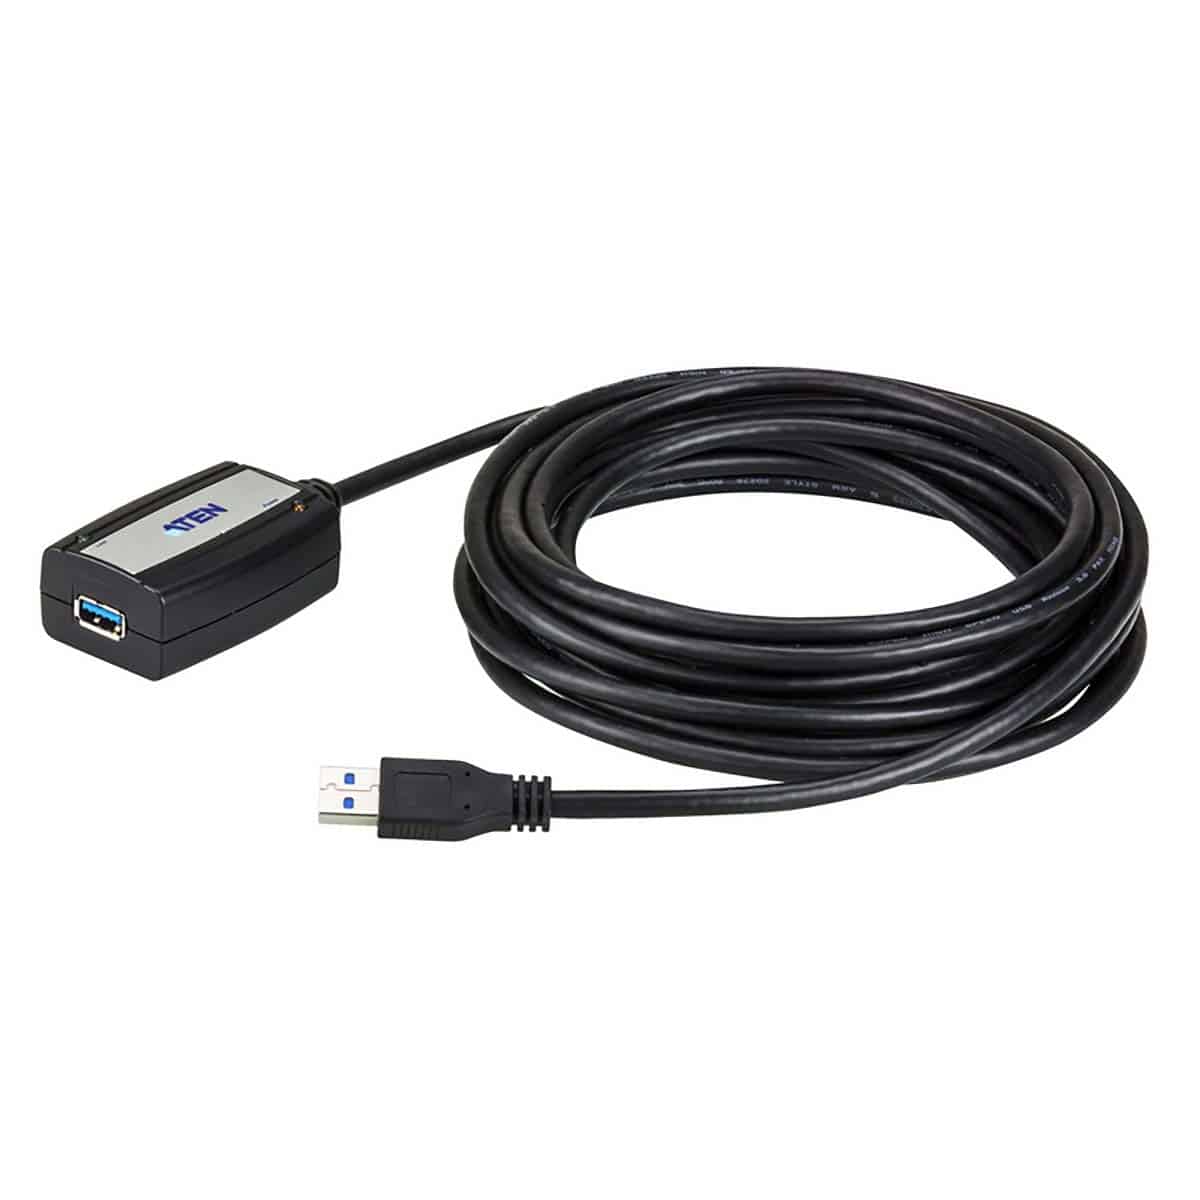 Aten USB 3.0 Extender Cable